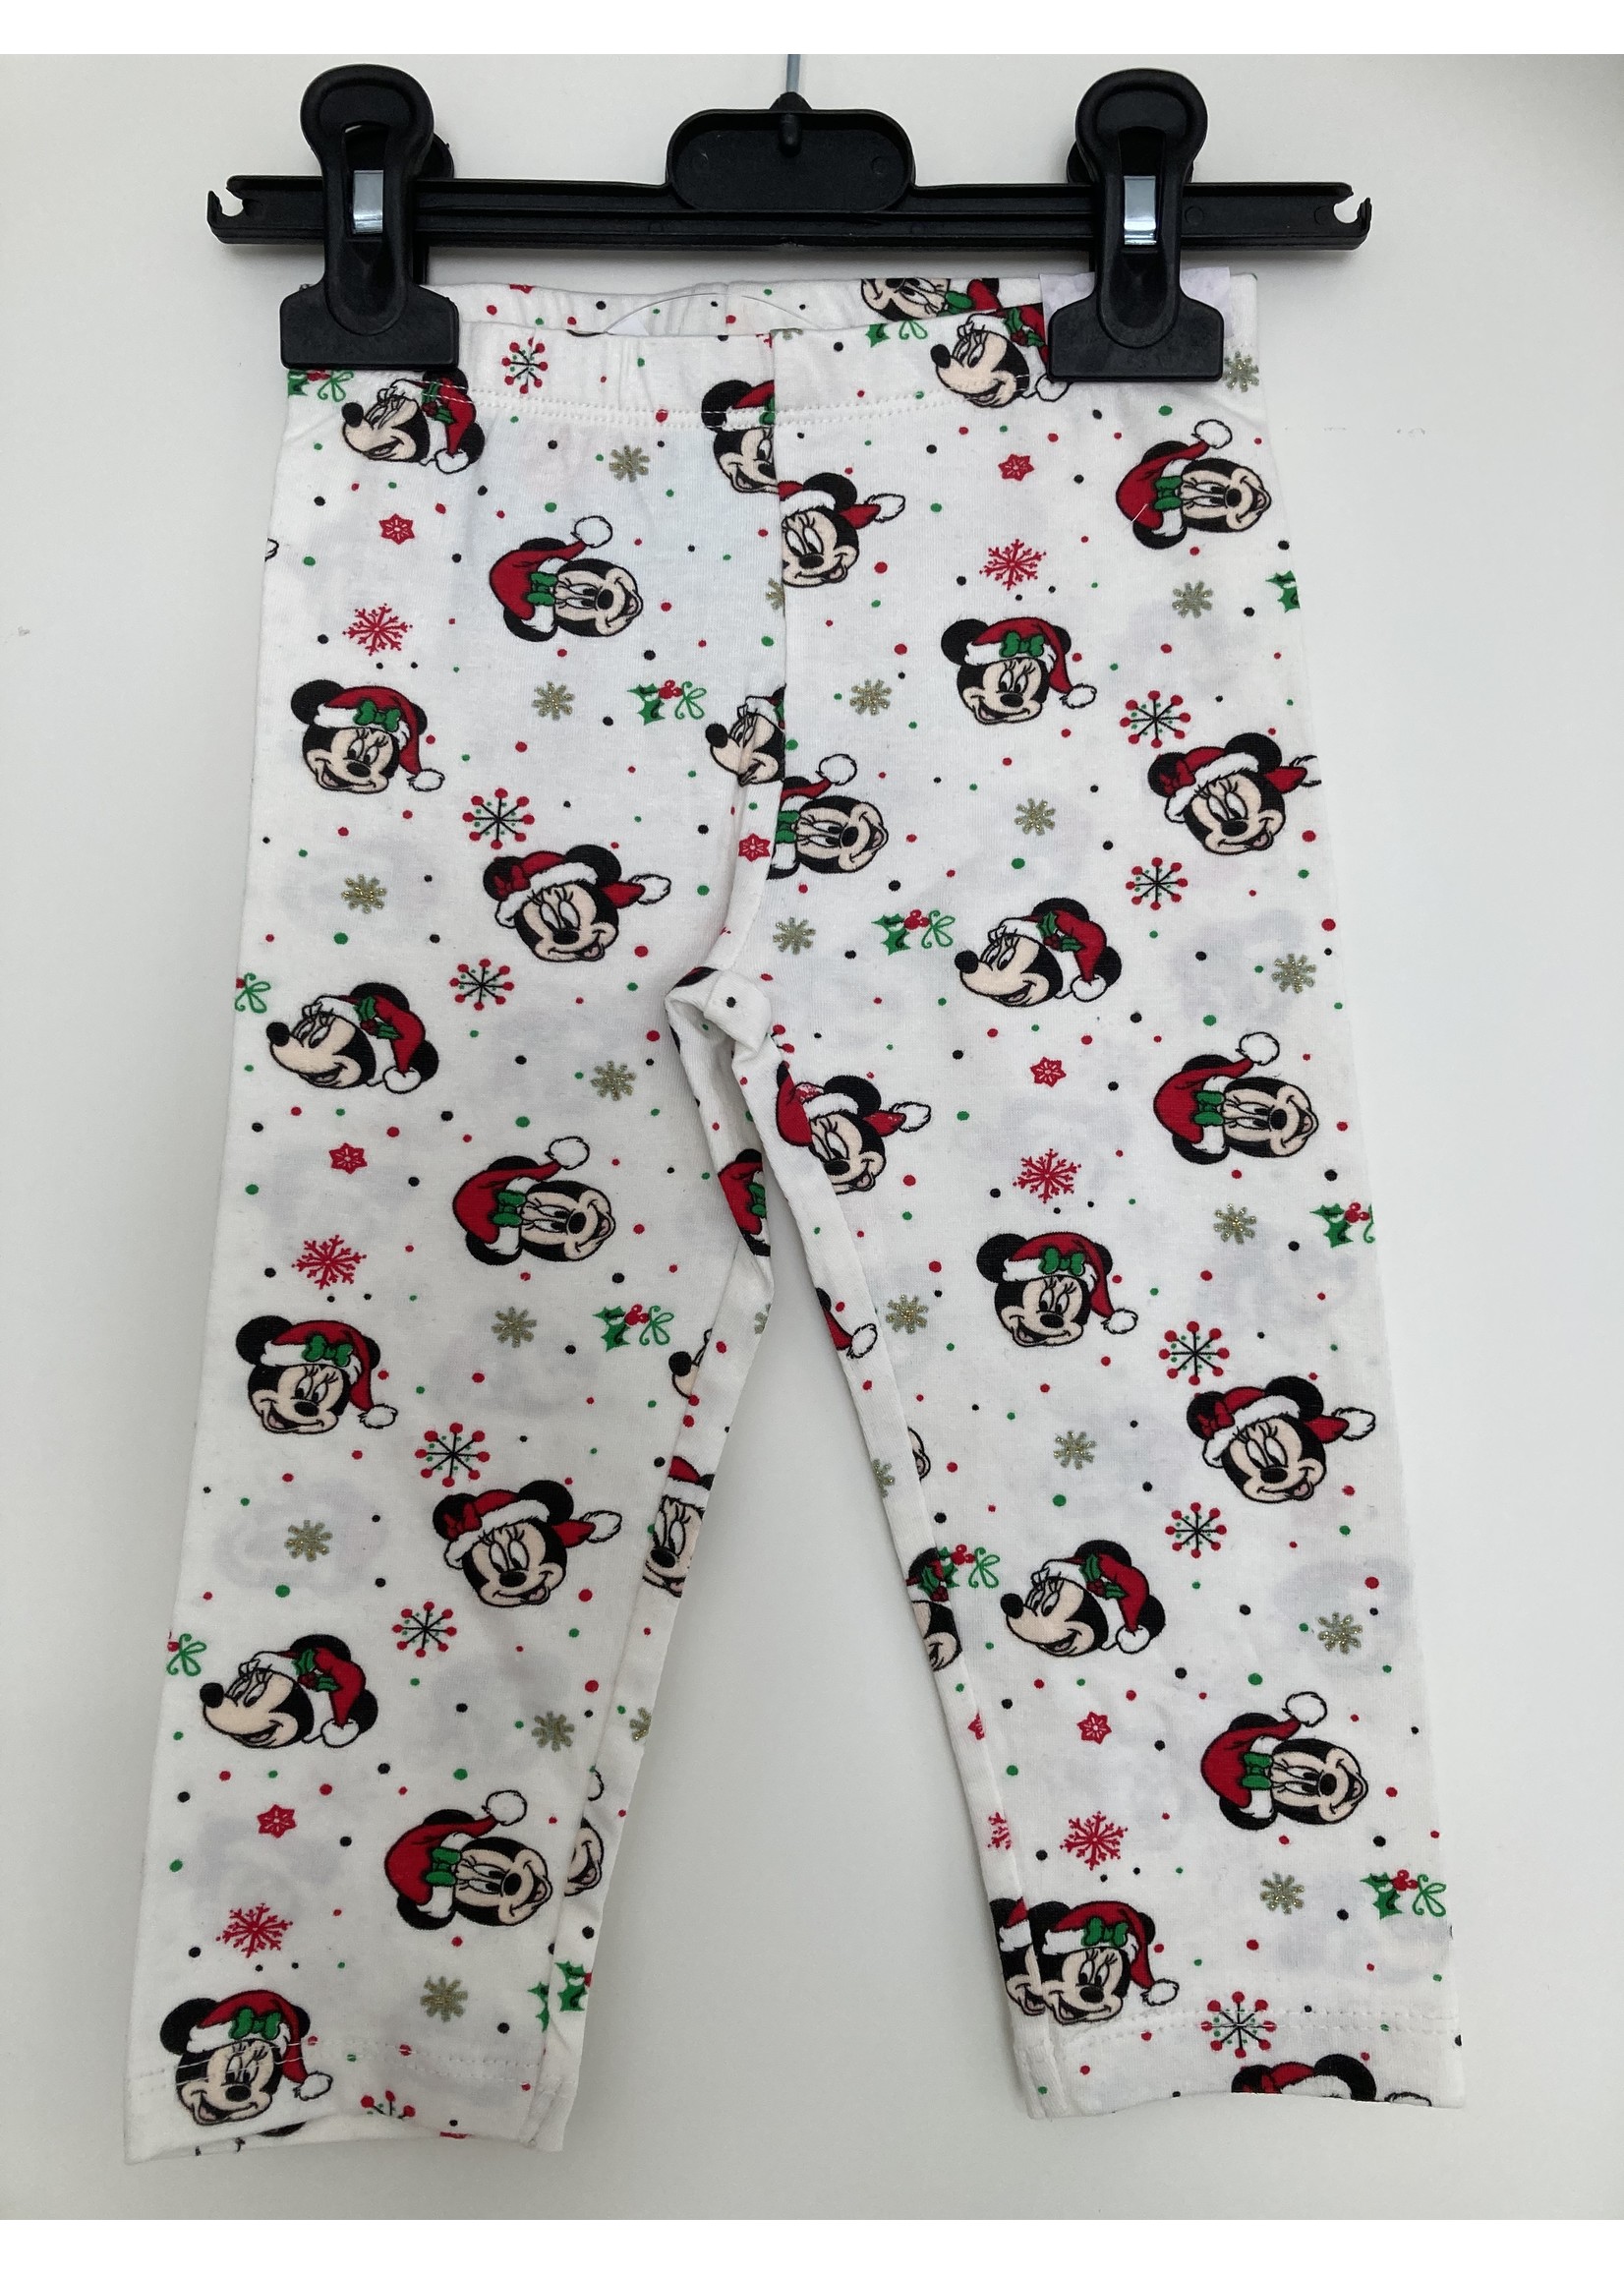 Disney baby Mickey & Minnie Mouse Christmas leggings from Disney baby white